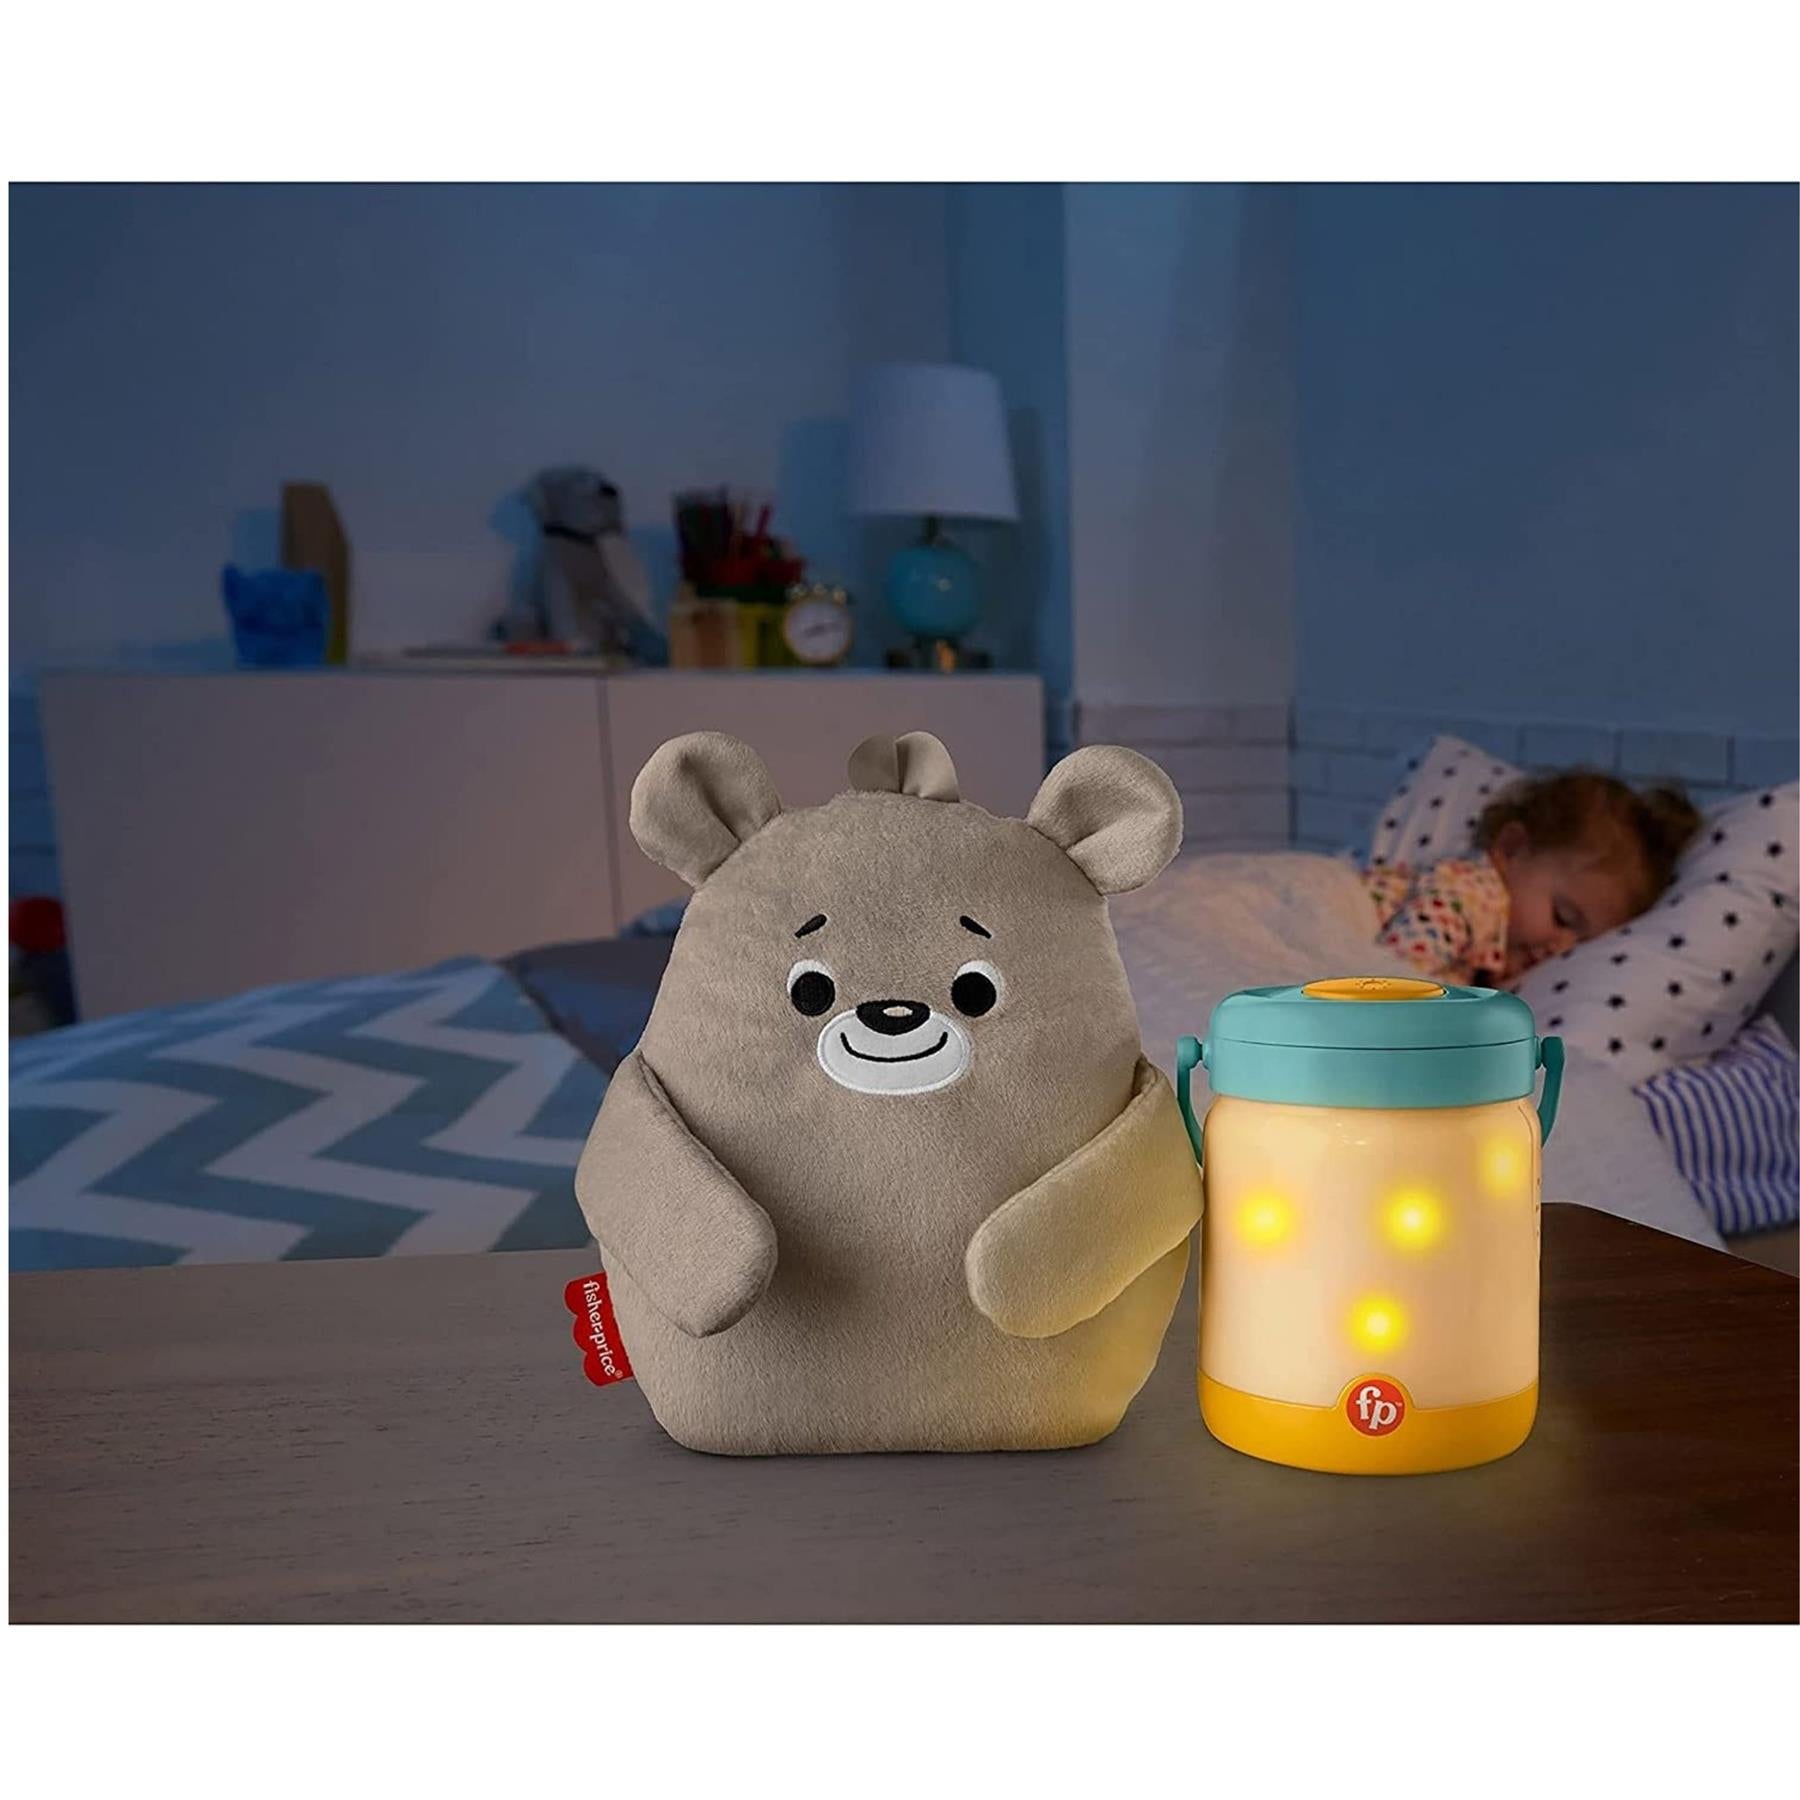 Fisher Price Soother Twinkle Teddy Firefly Soother With Calming Music